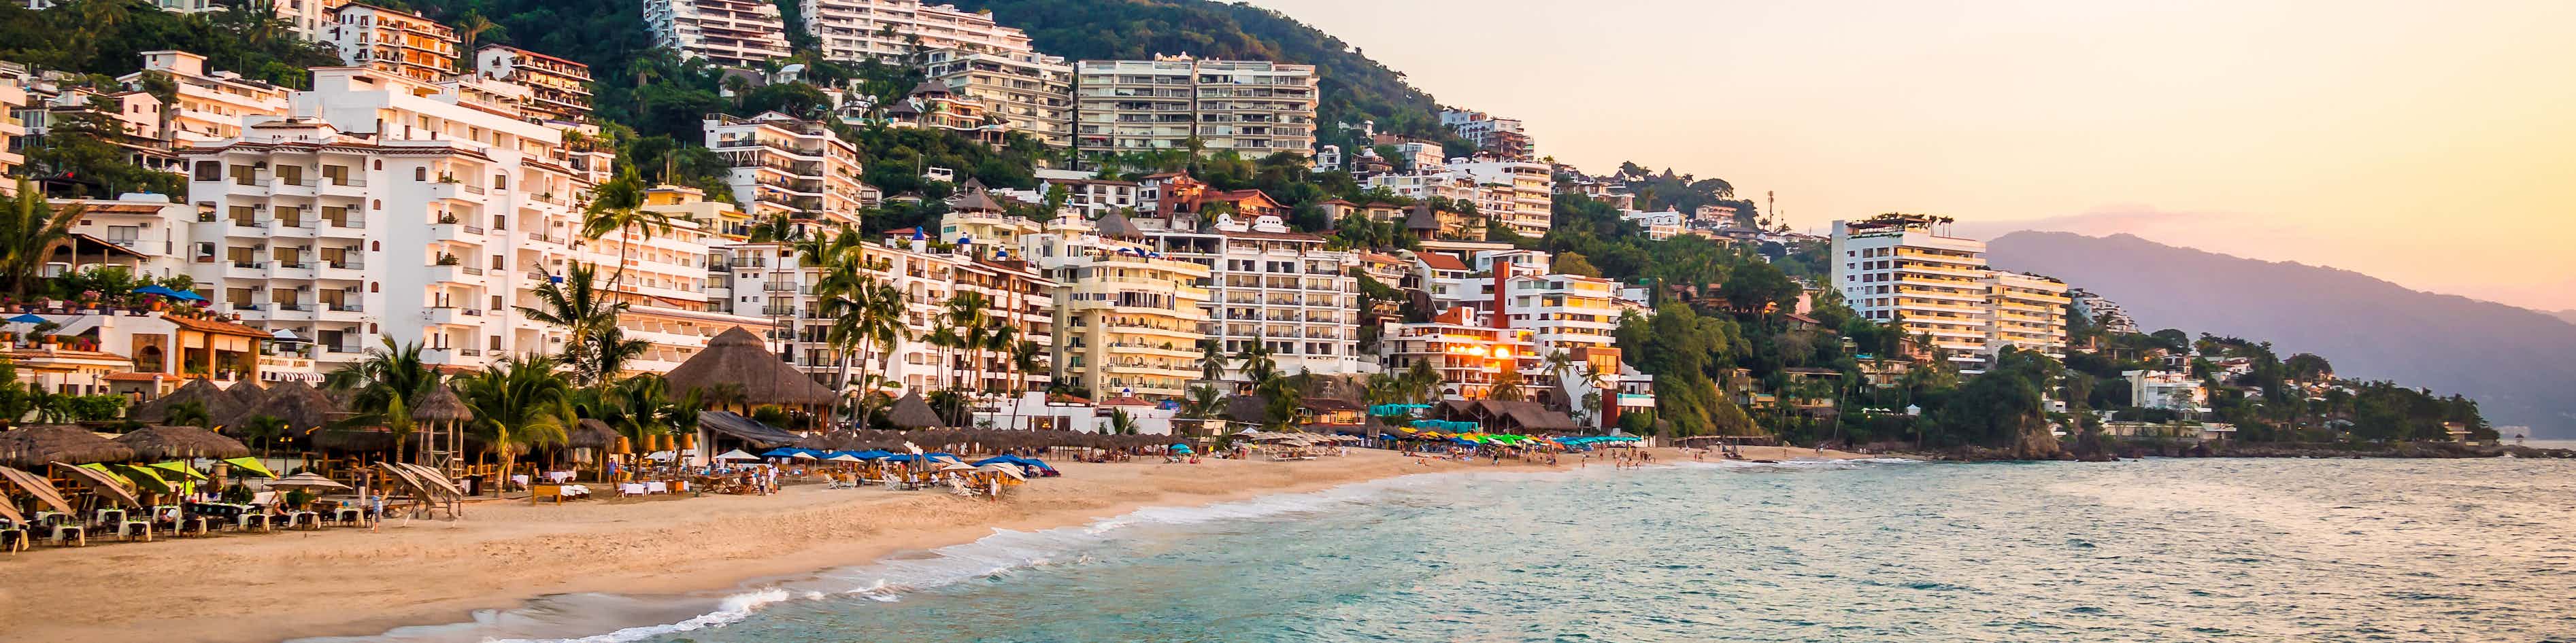 25 Best Things To Do In Puerto Vallarta, Mexico [2023]